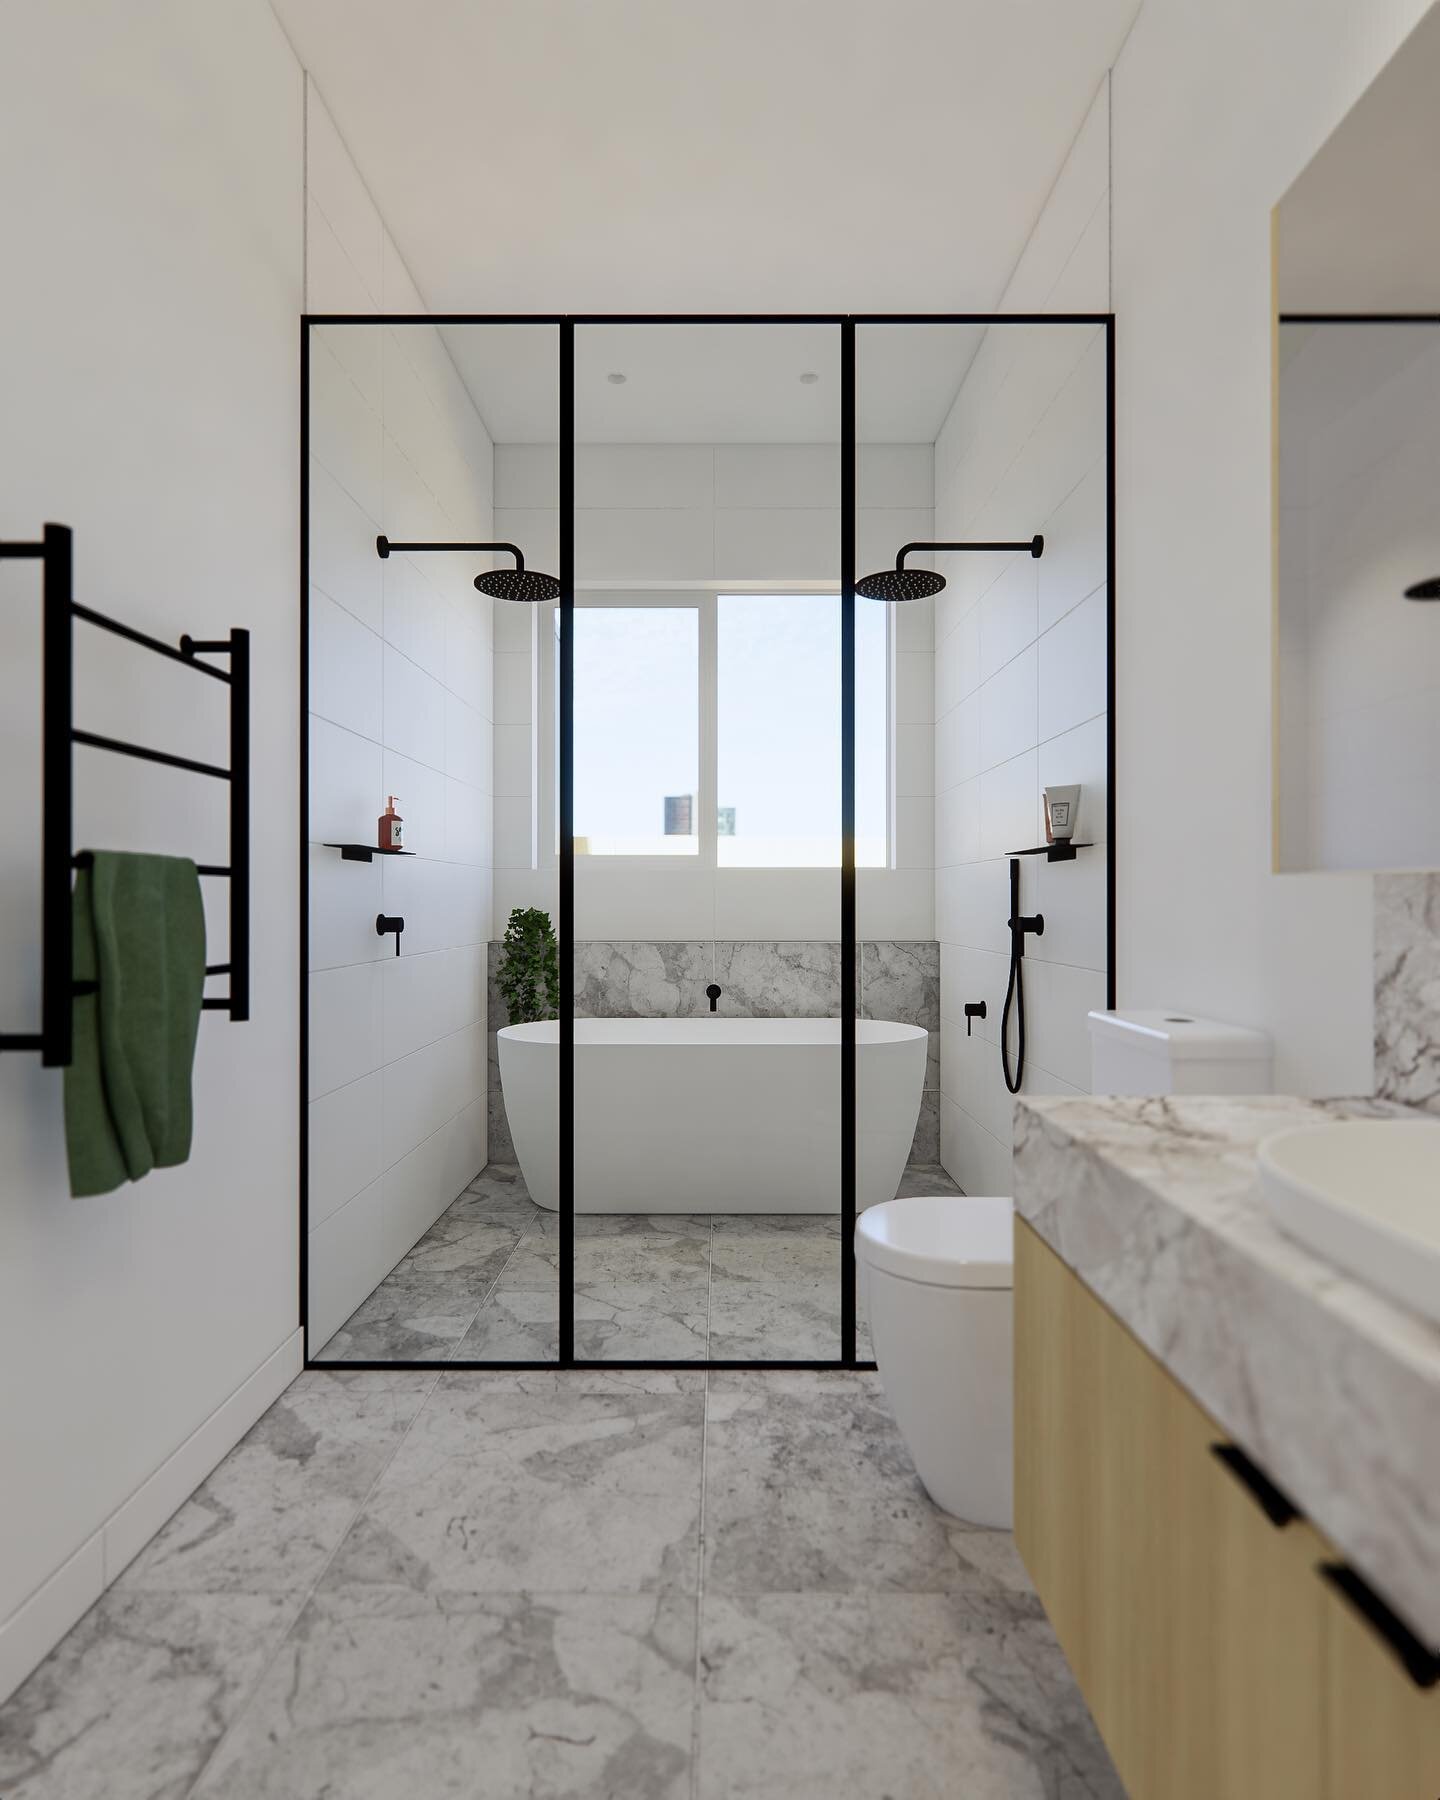 Wanalta House - Bathroom

A render of the bathroom at our Wanalta project currently under design
.
.
.
.
.
#basebuildingdesign #buildingdesign #architecture #archidaily #melbournehomes #melbournearchitecture #homedesign #renovation #homeextension #de